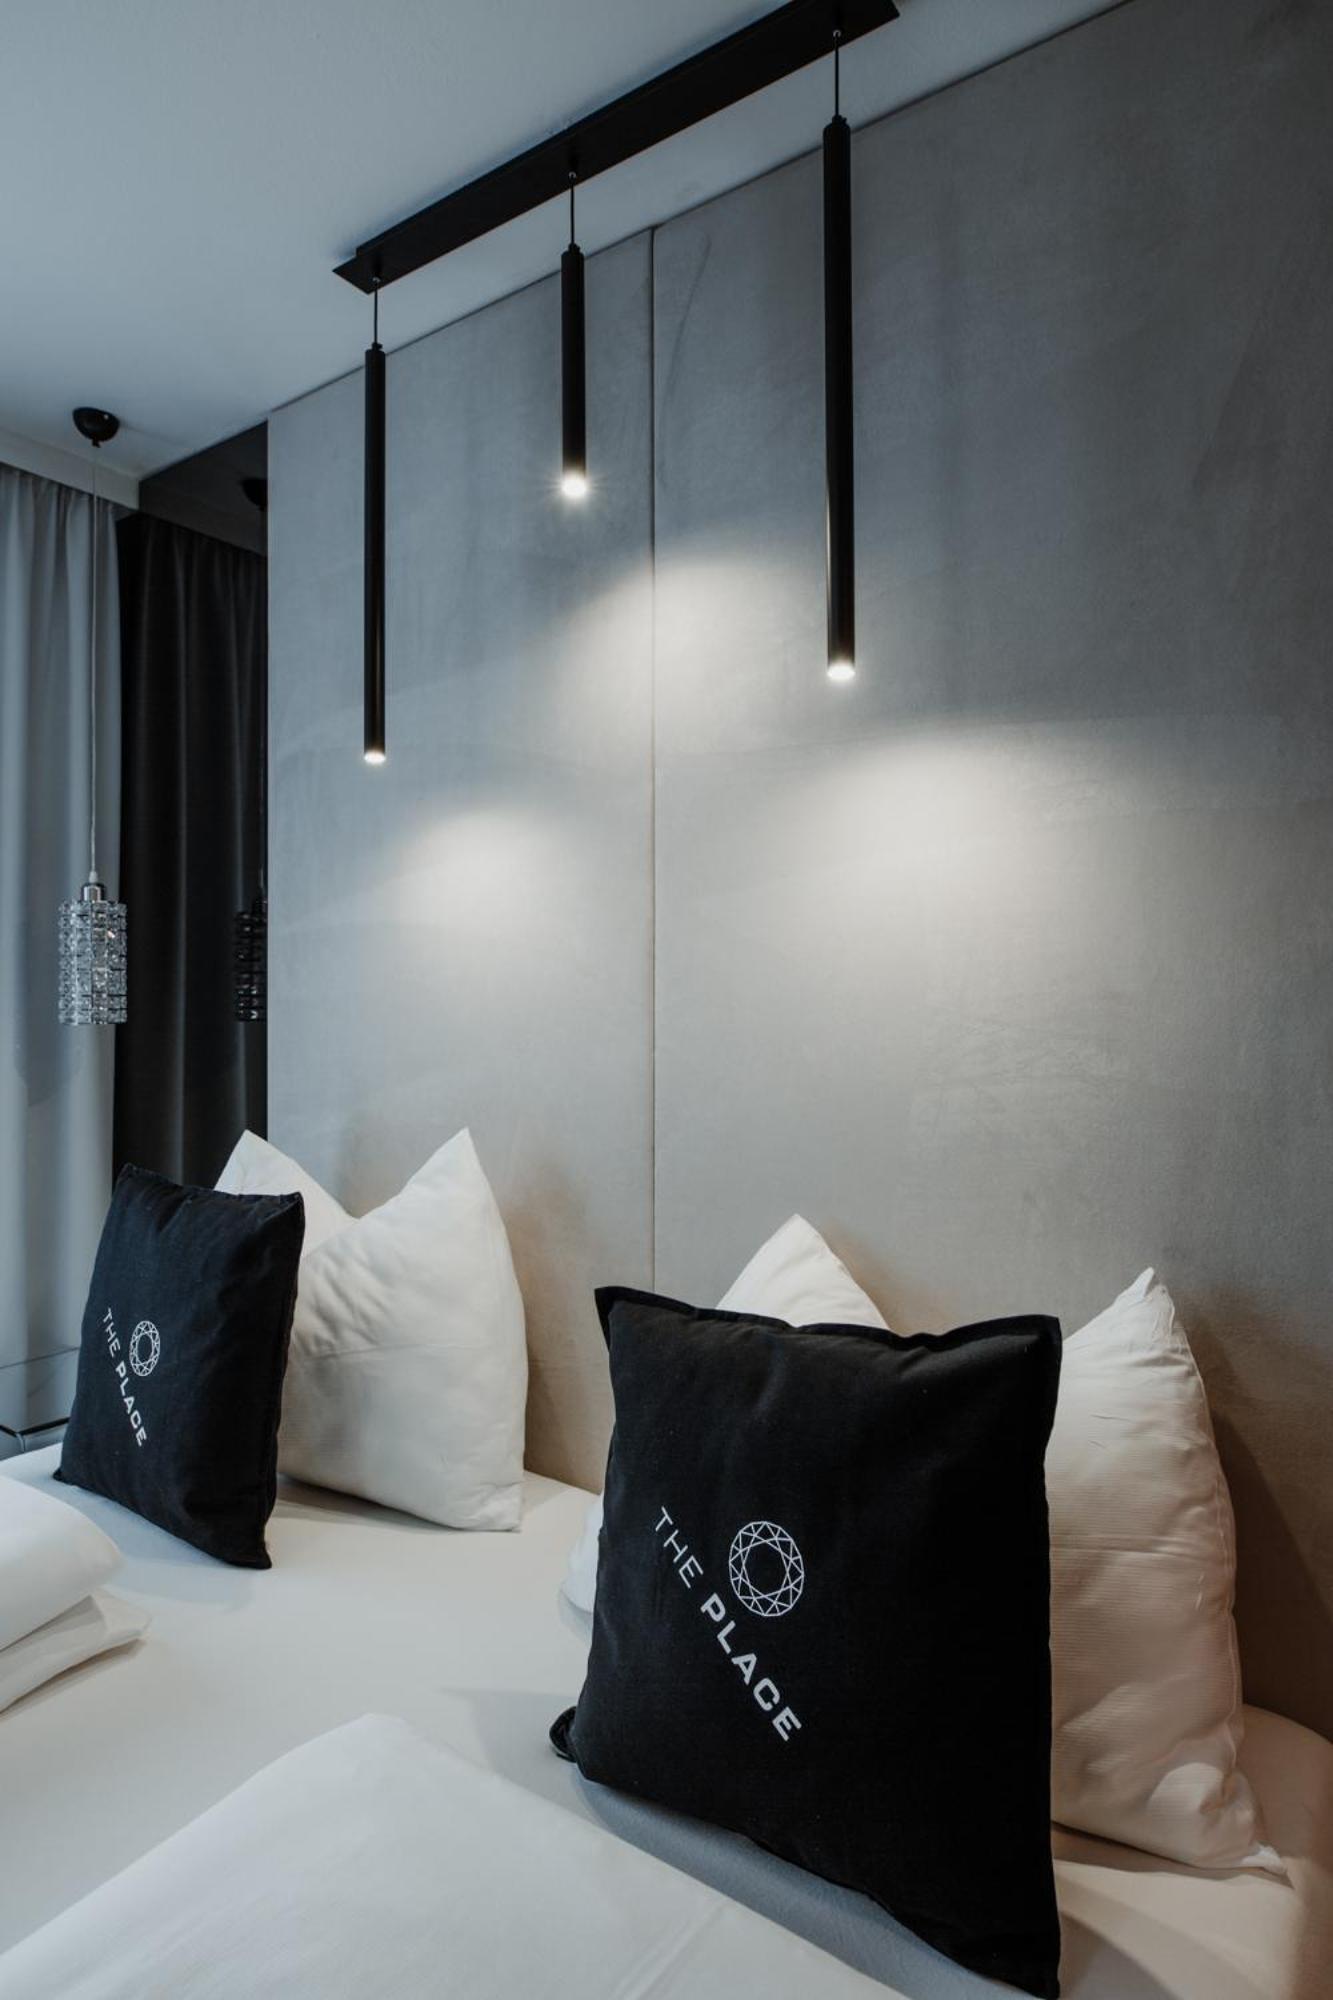 The Place Boutique & Design Hotel 弗拉绍 外观 照片